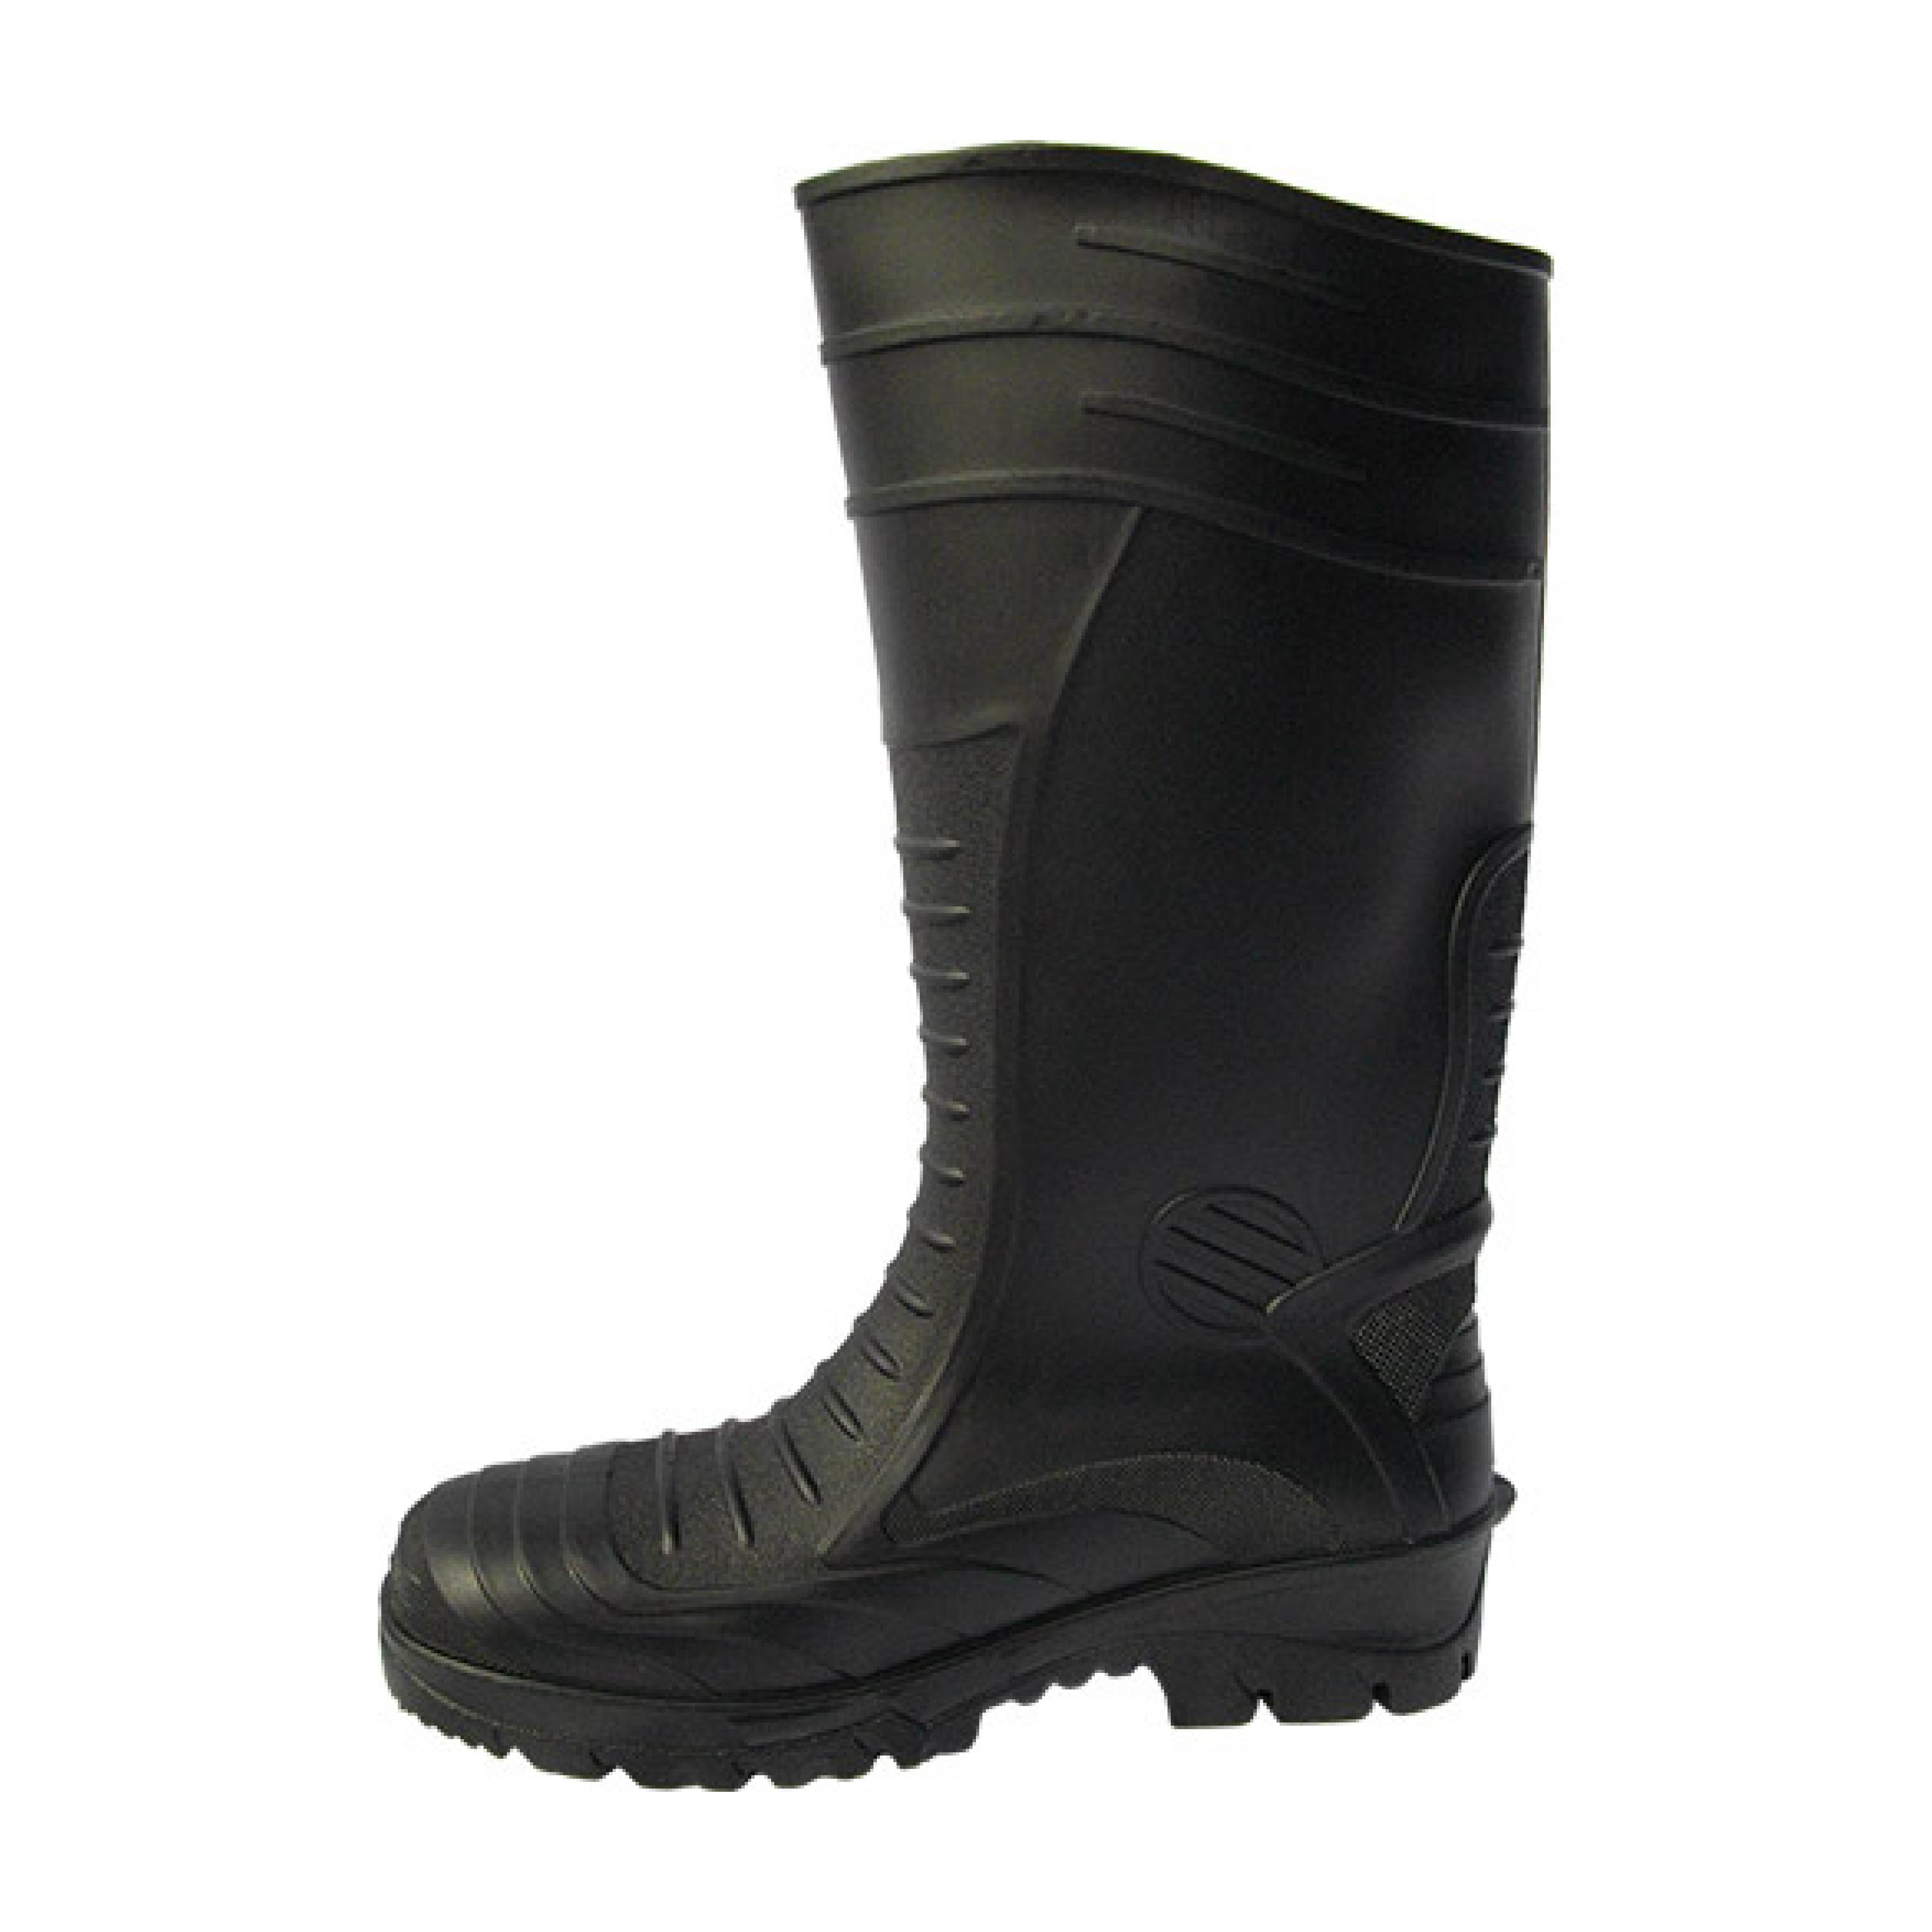 Black PVC Safety Gumboot Size 11 (1 pair)